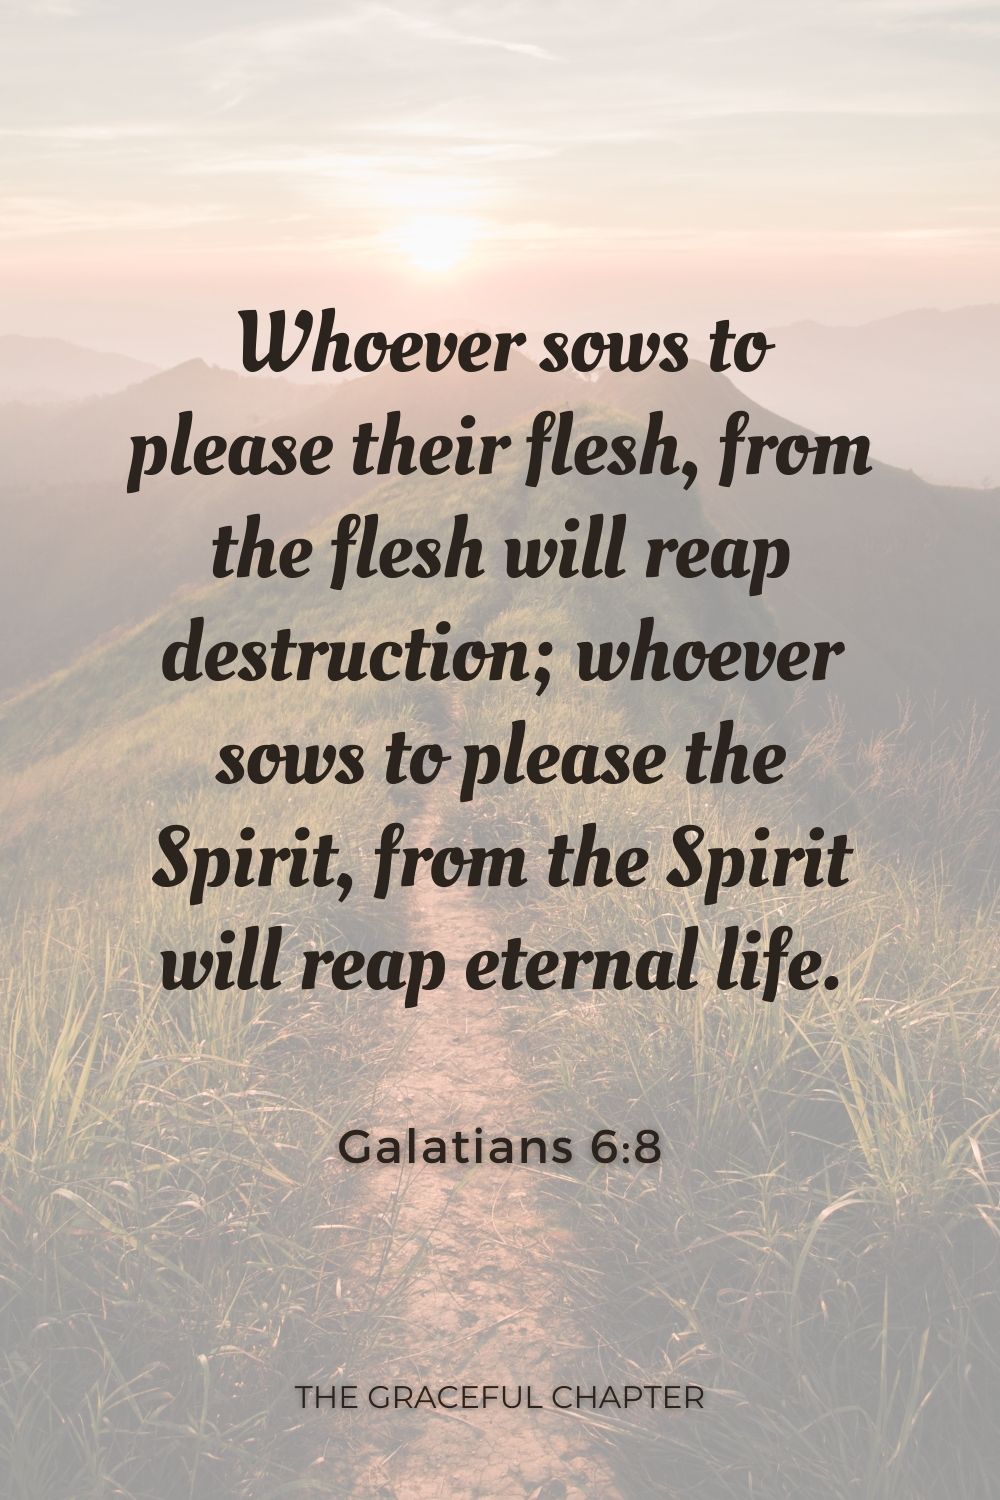 Whoever sows to please their flesh, from the flesh will reap destruction; whoever sows to please the Spirit, from the Spirit will reap eternal life. Galatians 6:8